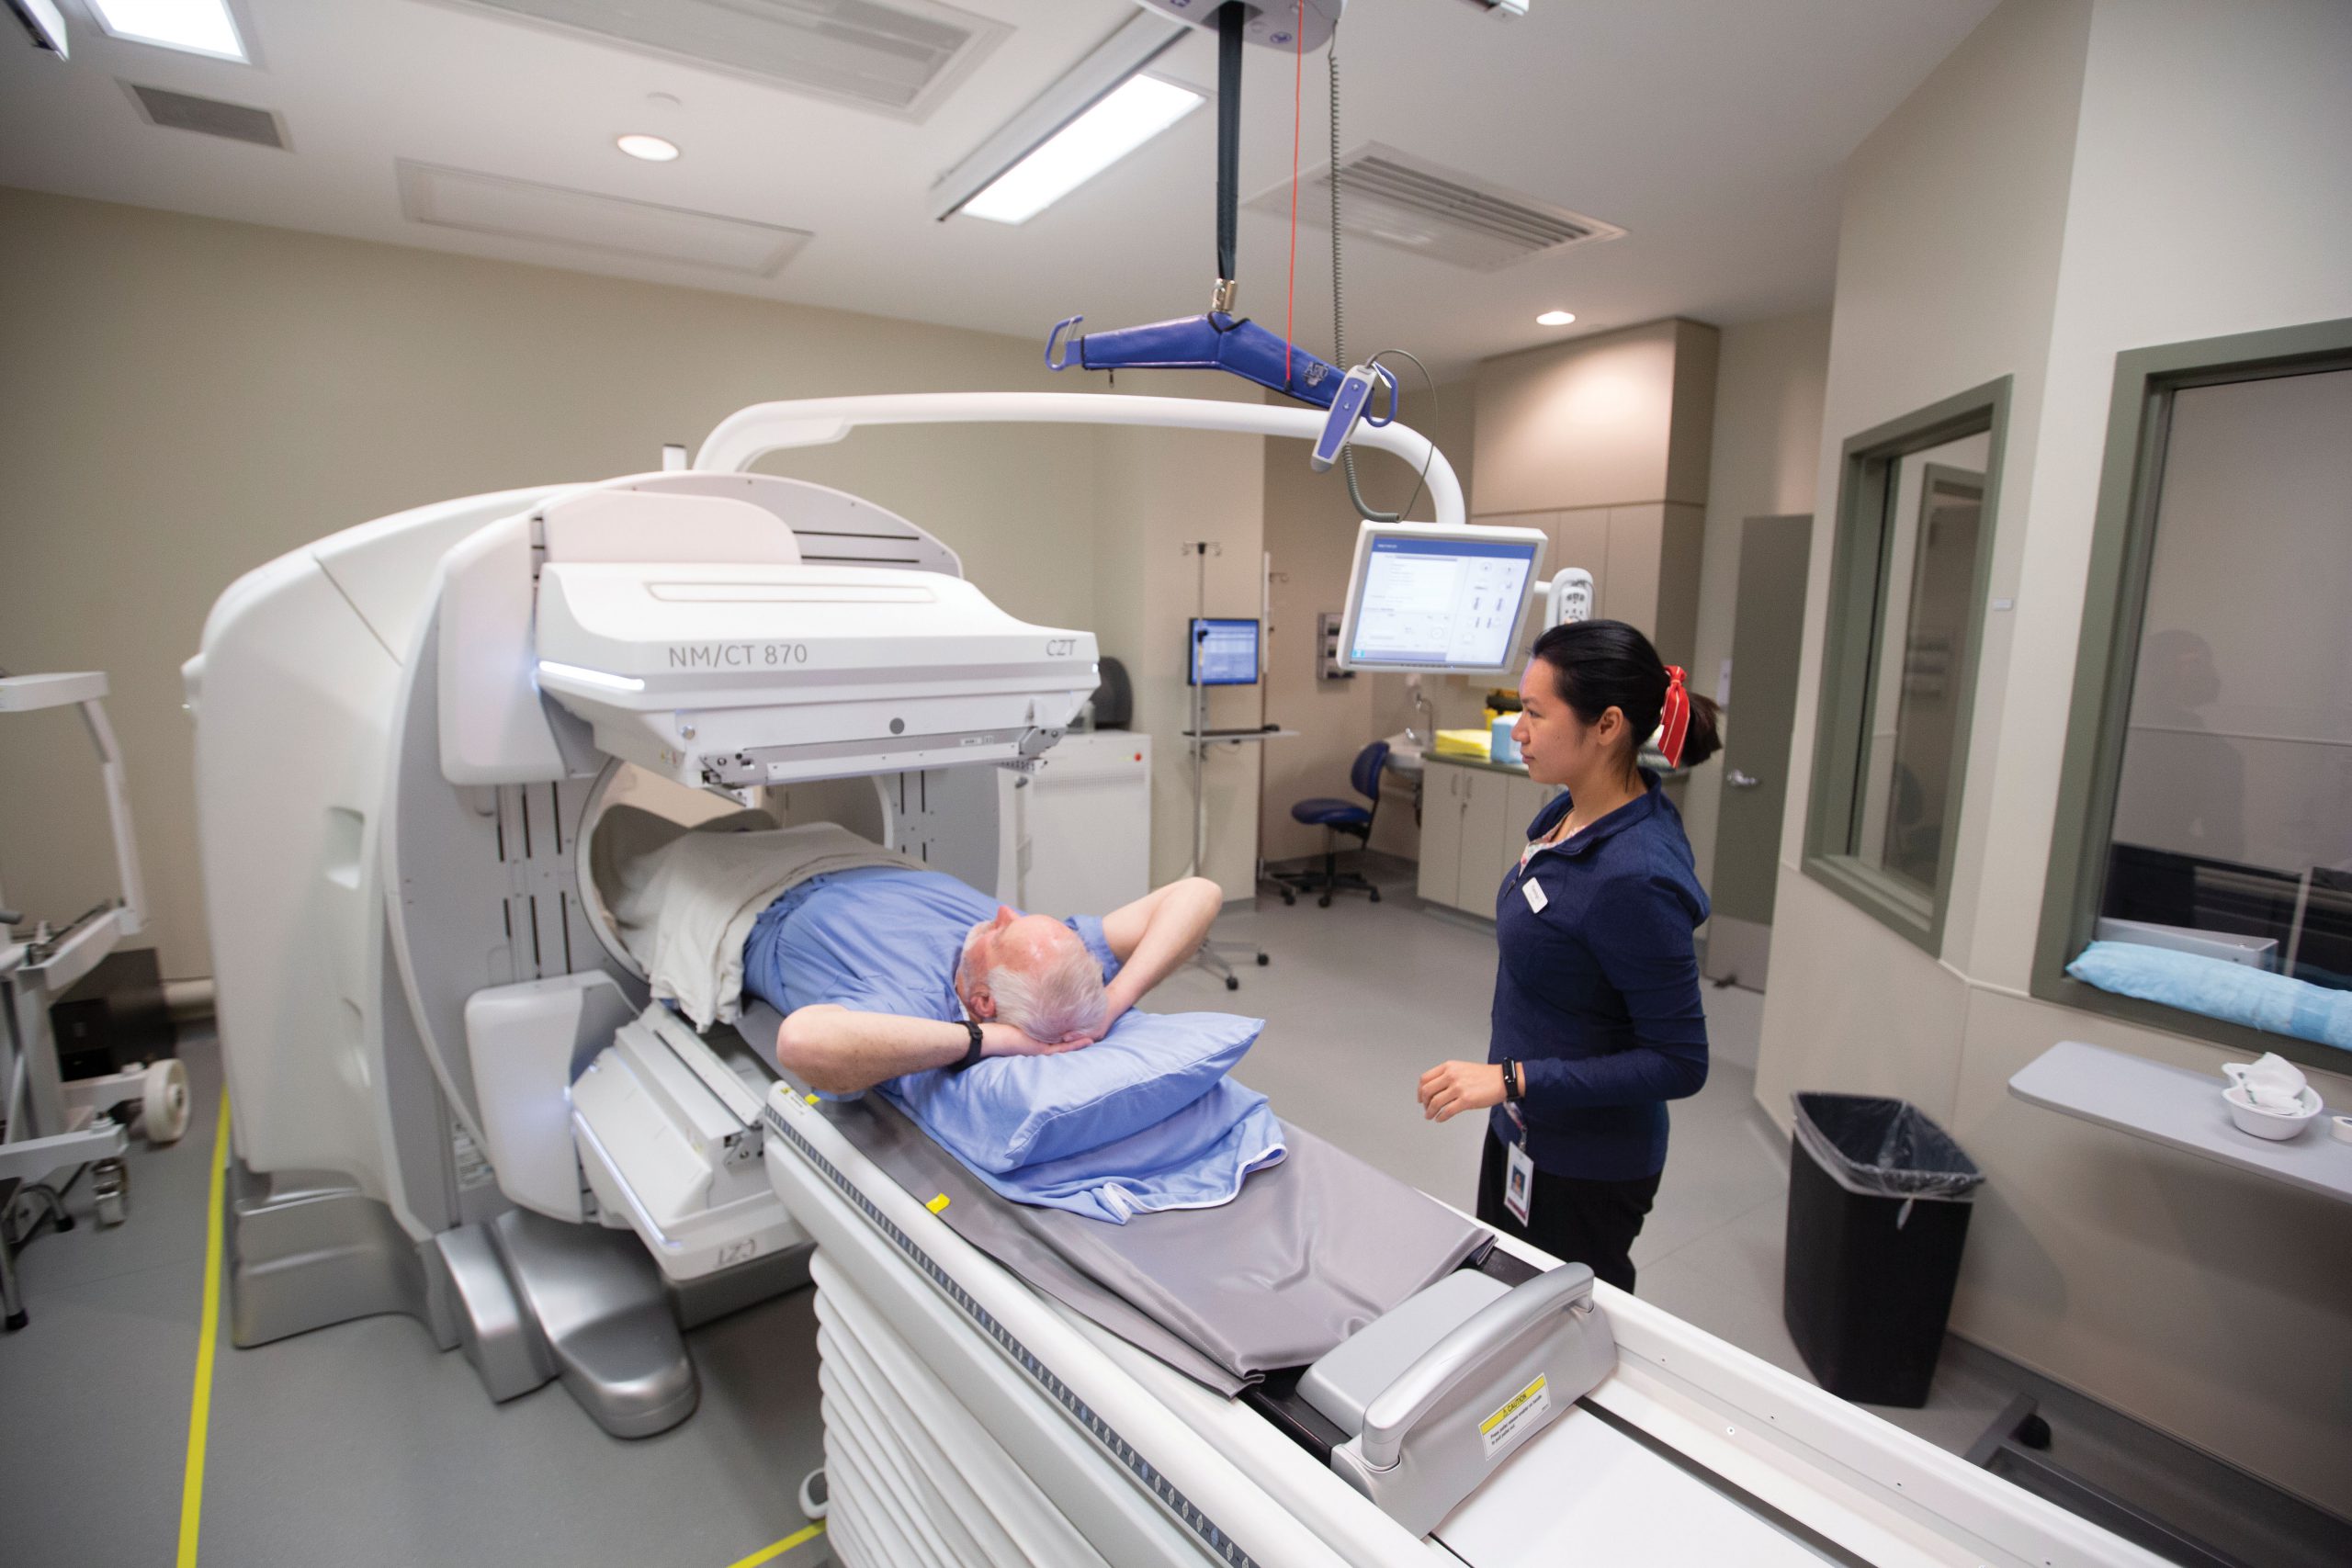 A medical radiation technologist demonstrates a SPECT/CT machine